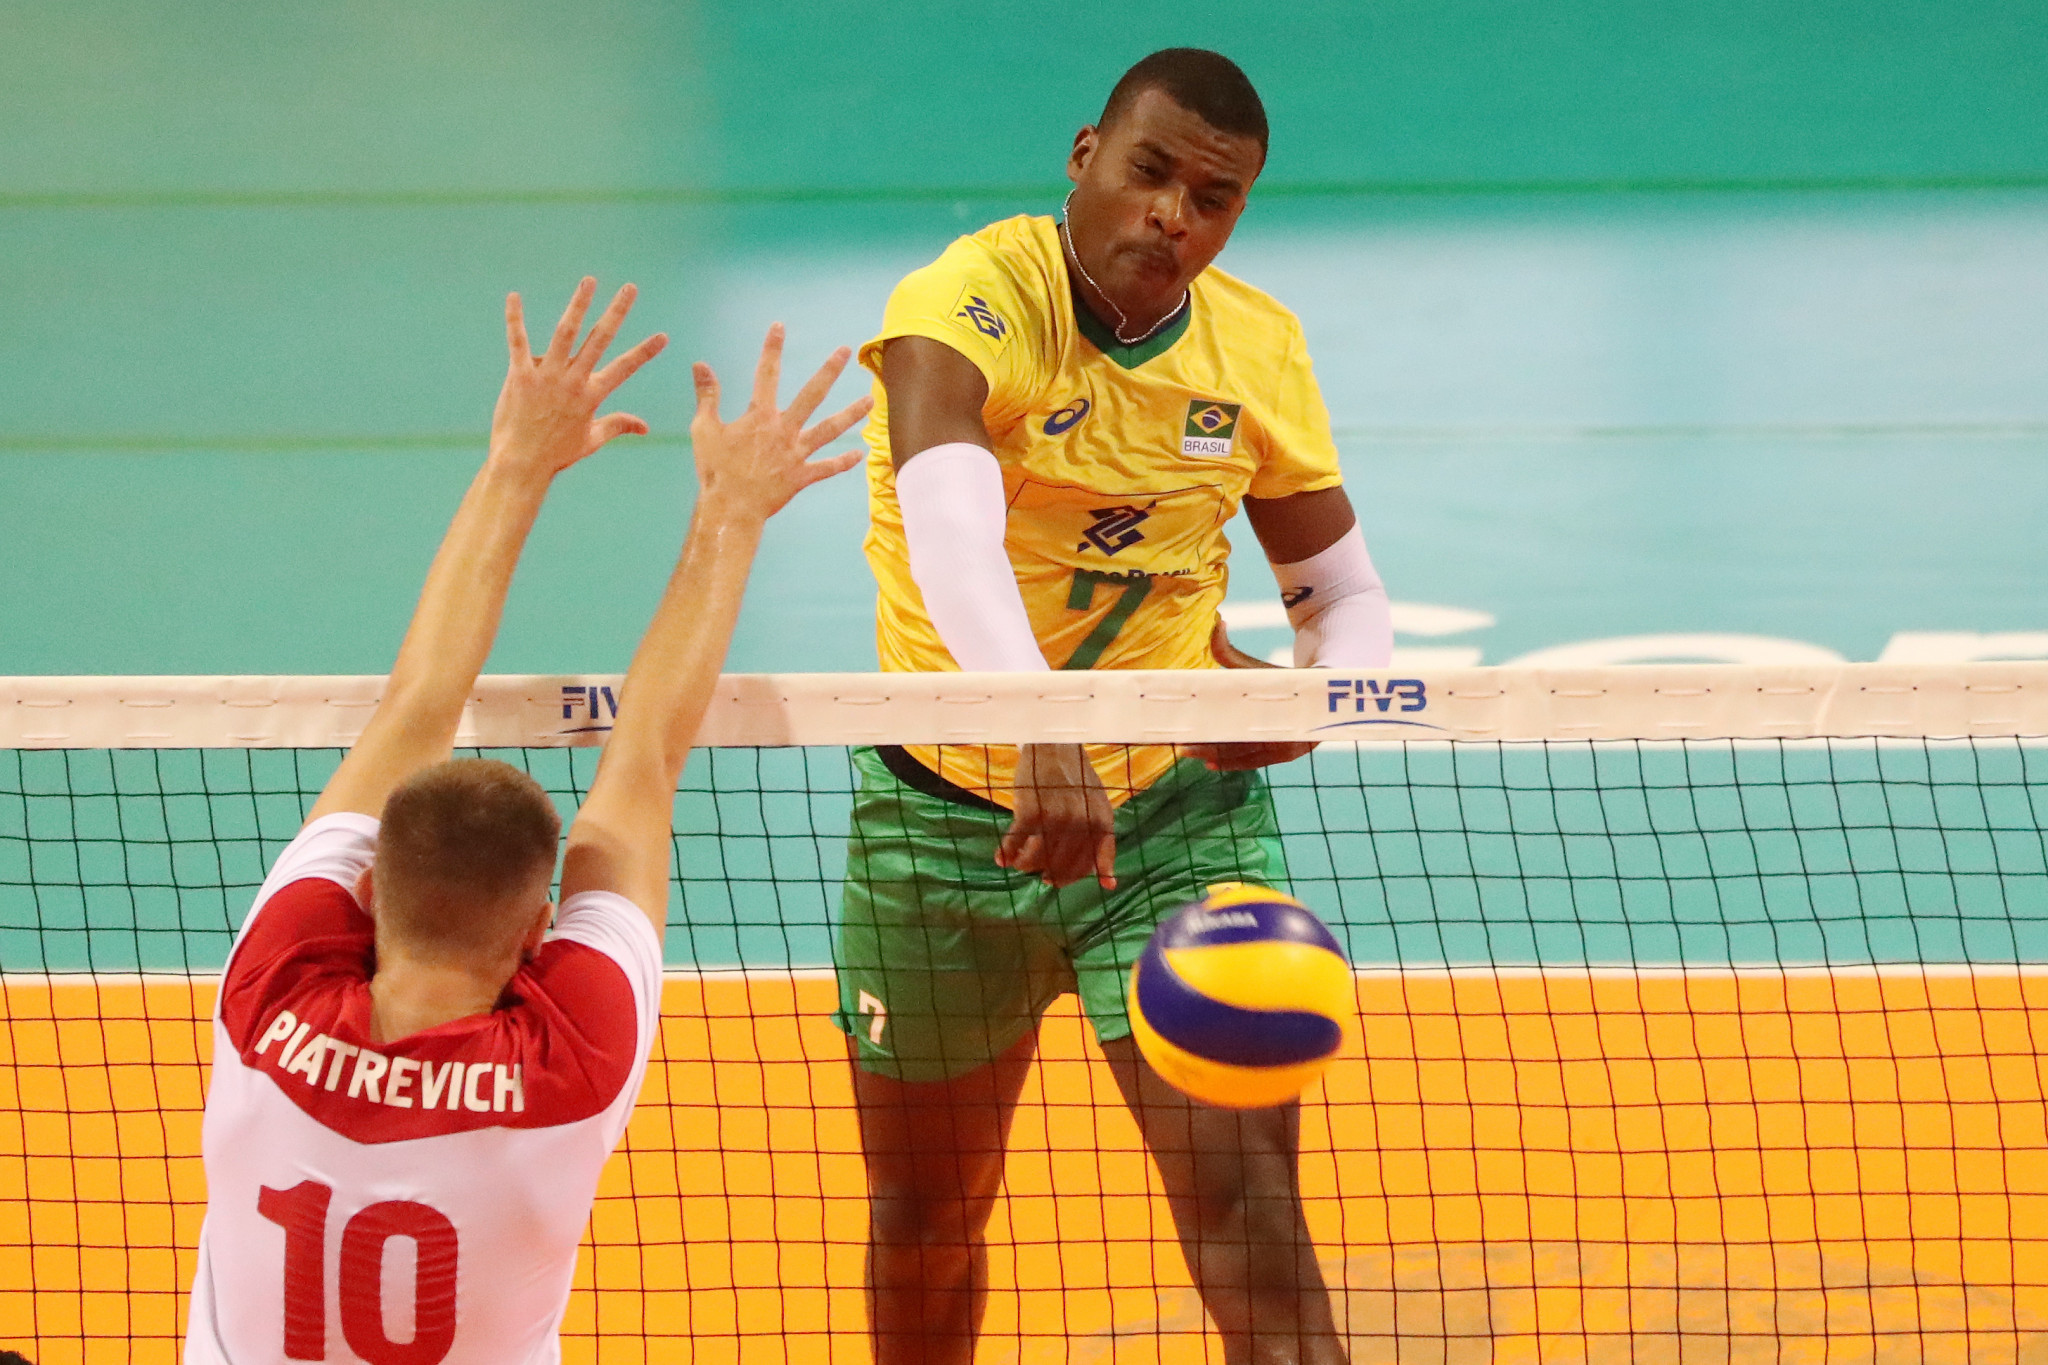 Paulo Ferreira of Brazil scored 18 points as the favourites defeated Belarus in Tunis ©FIVB